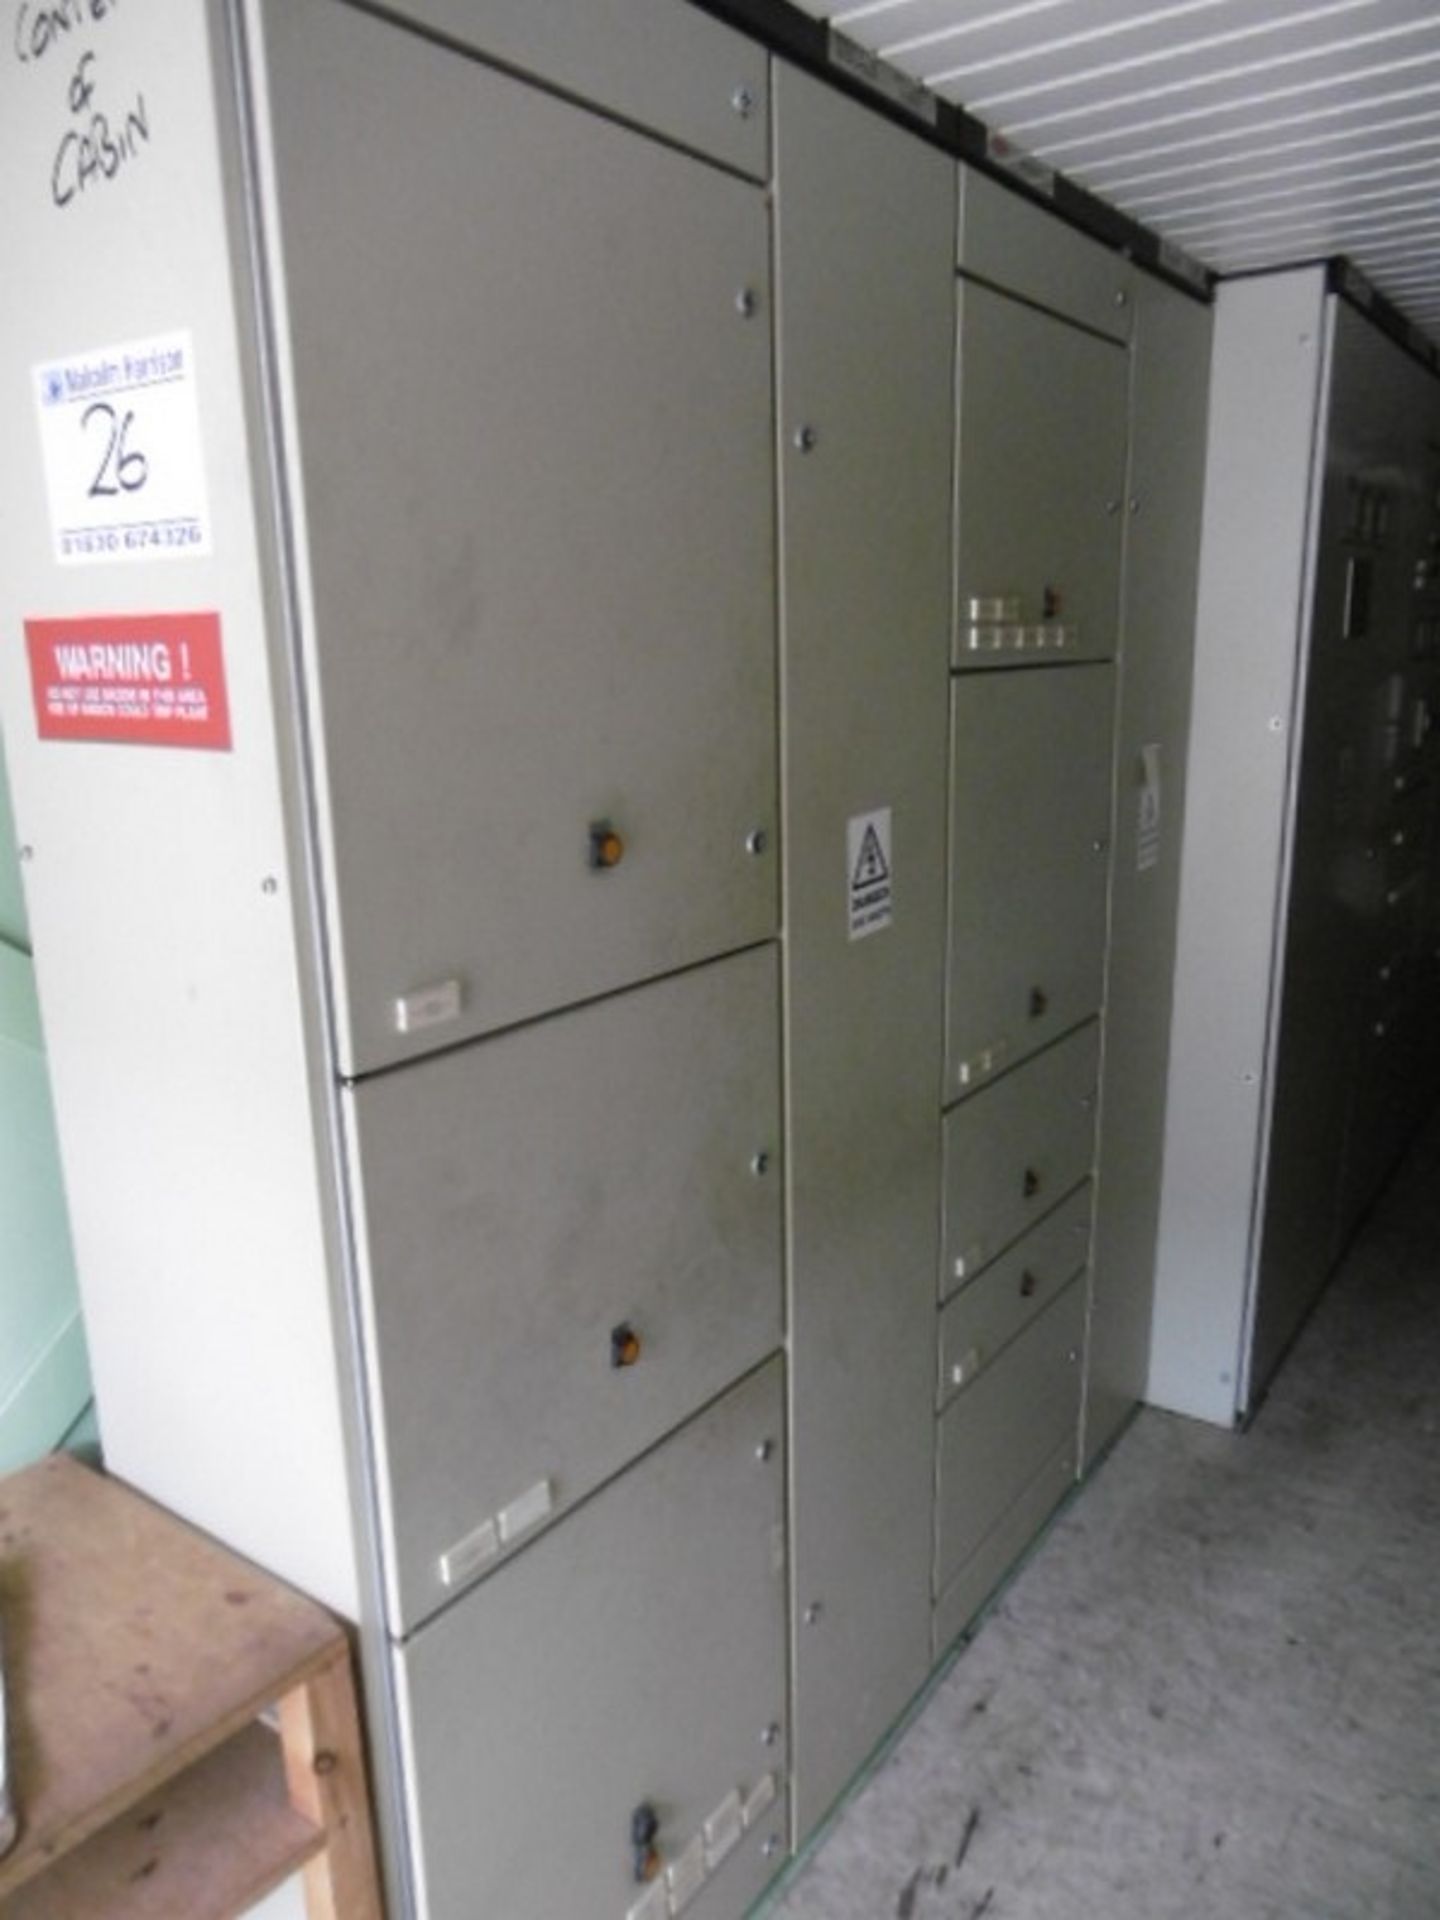 Large Qty Switchgear - From Gas Turbine 2 Control Module Building - Image 18 of 36